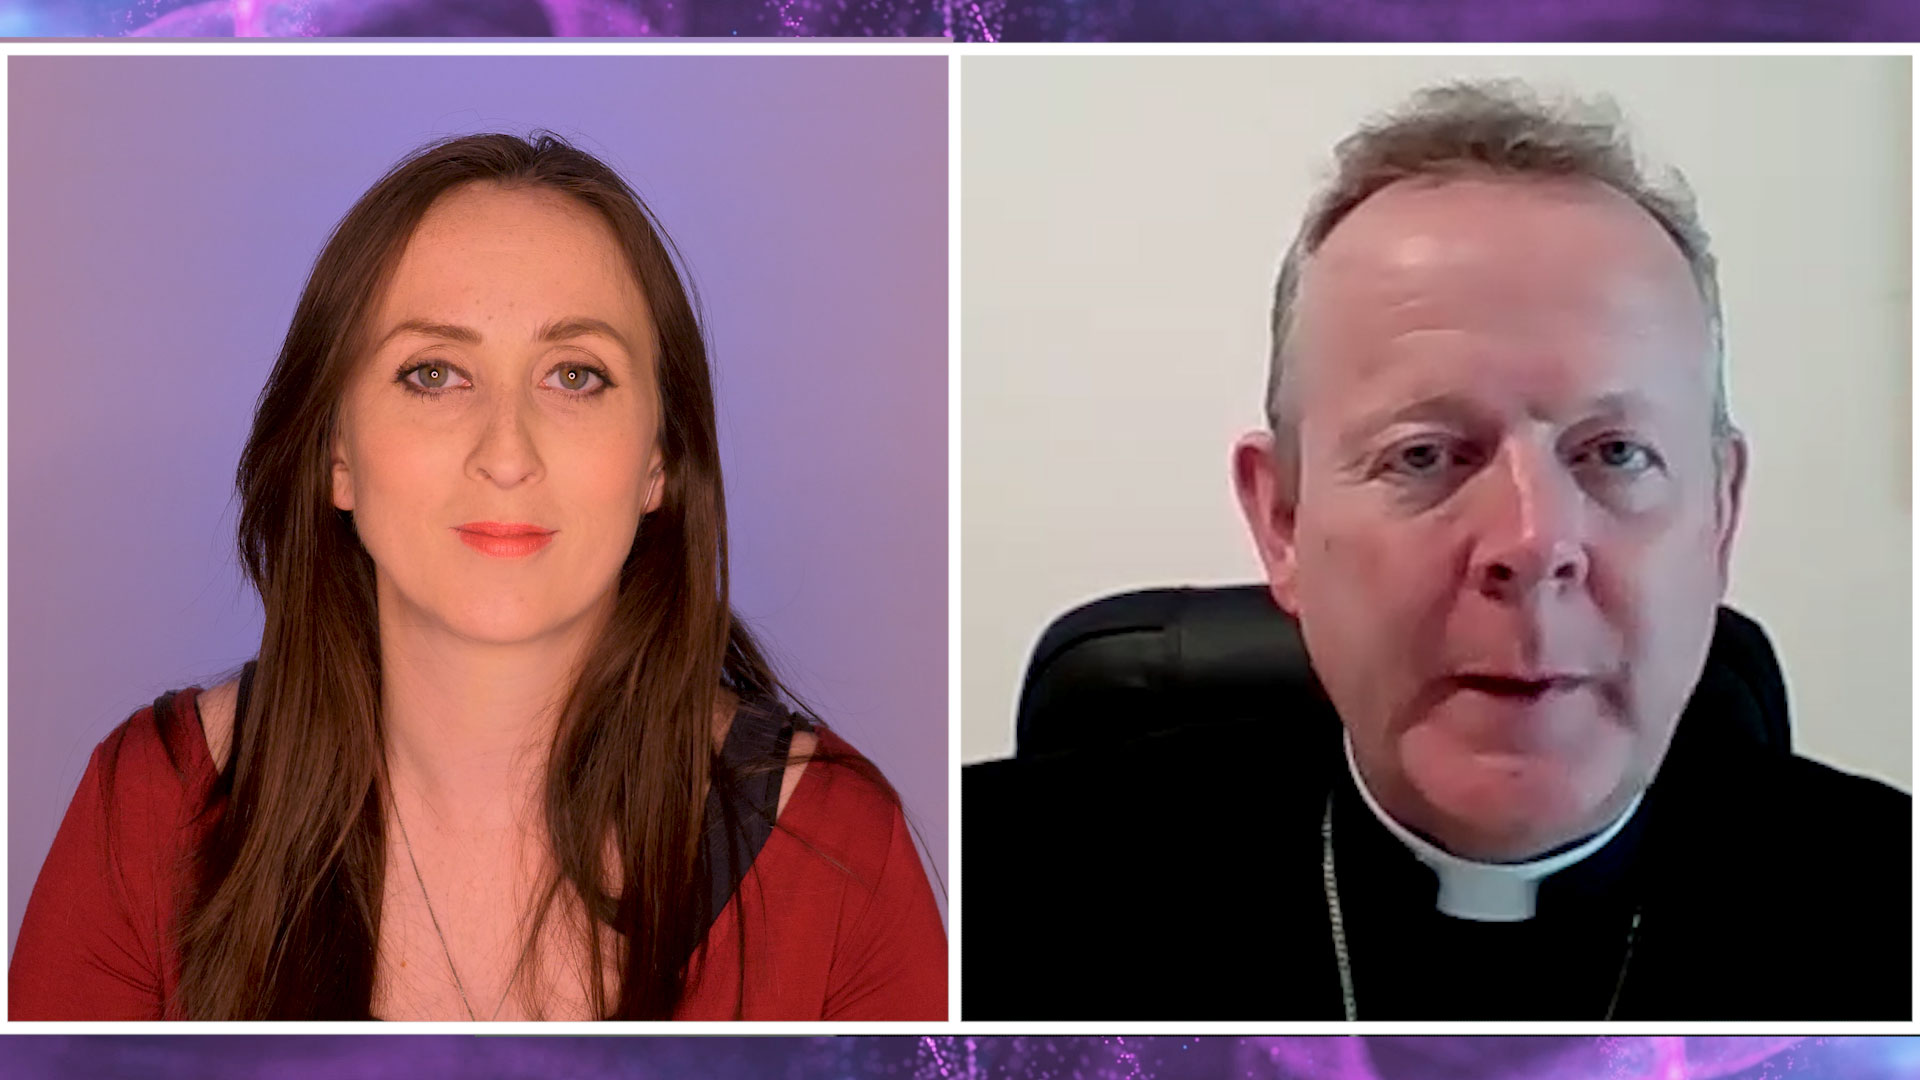 Coping with COVID crisis and re-opening Churches – Archbishop Eamon Martin